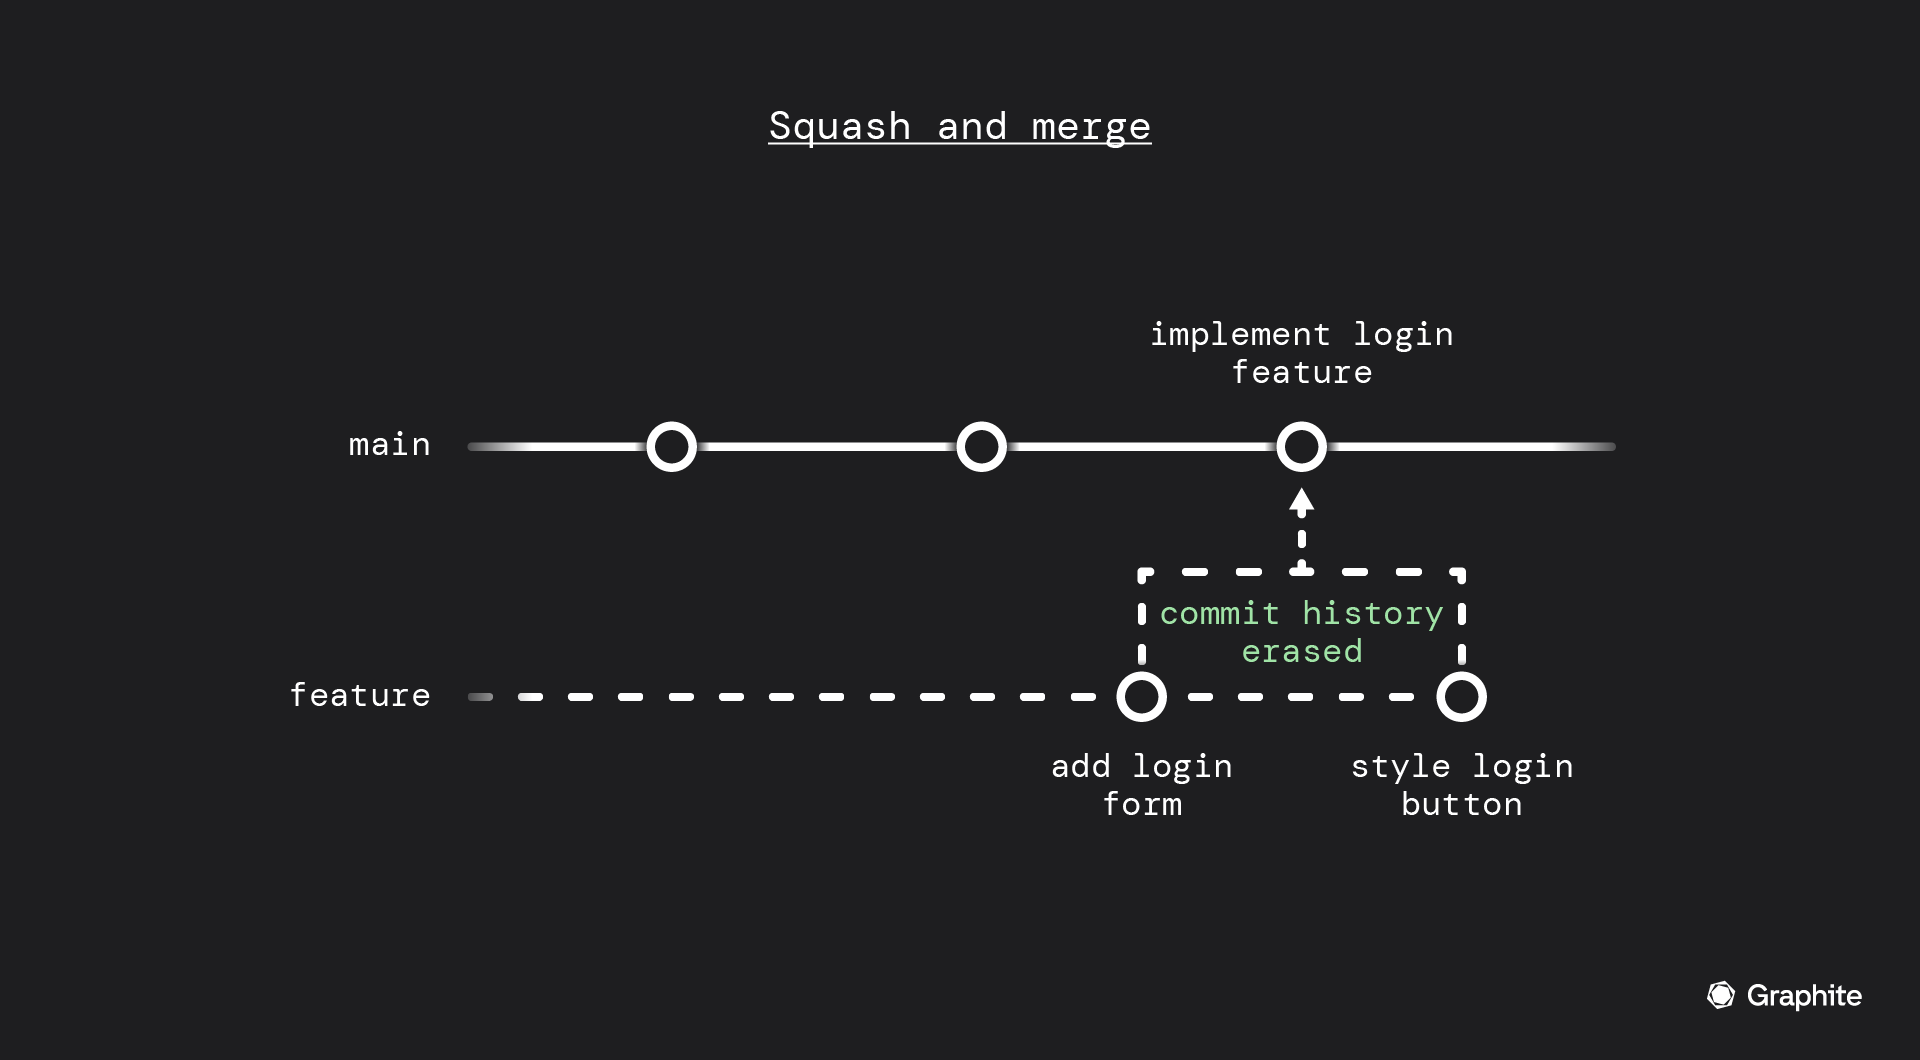 Squash and merge with a separate line, separate feature, feature commit: add login form, commit history erased, style login button, implement login feature on merge to main